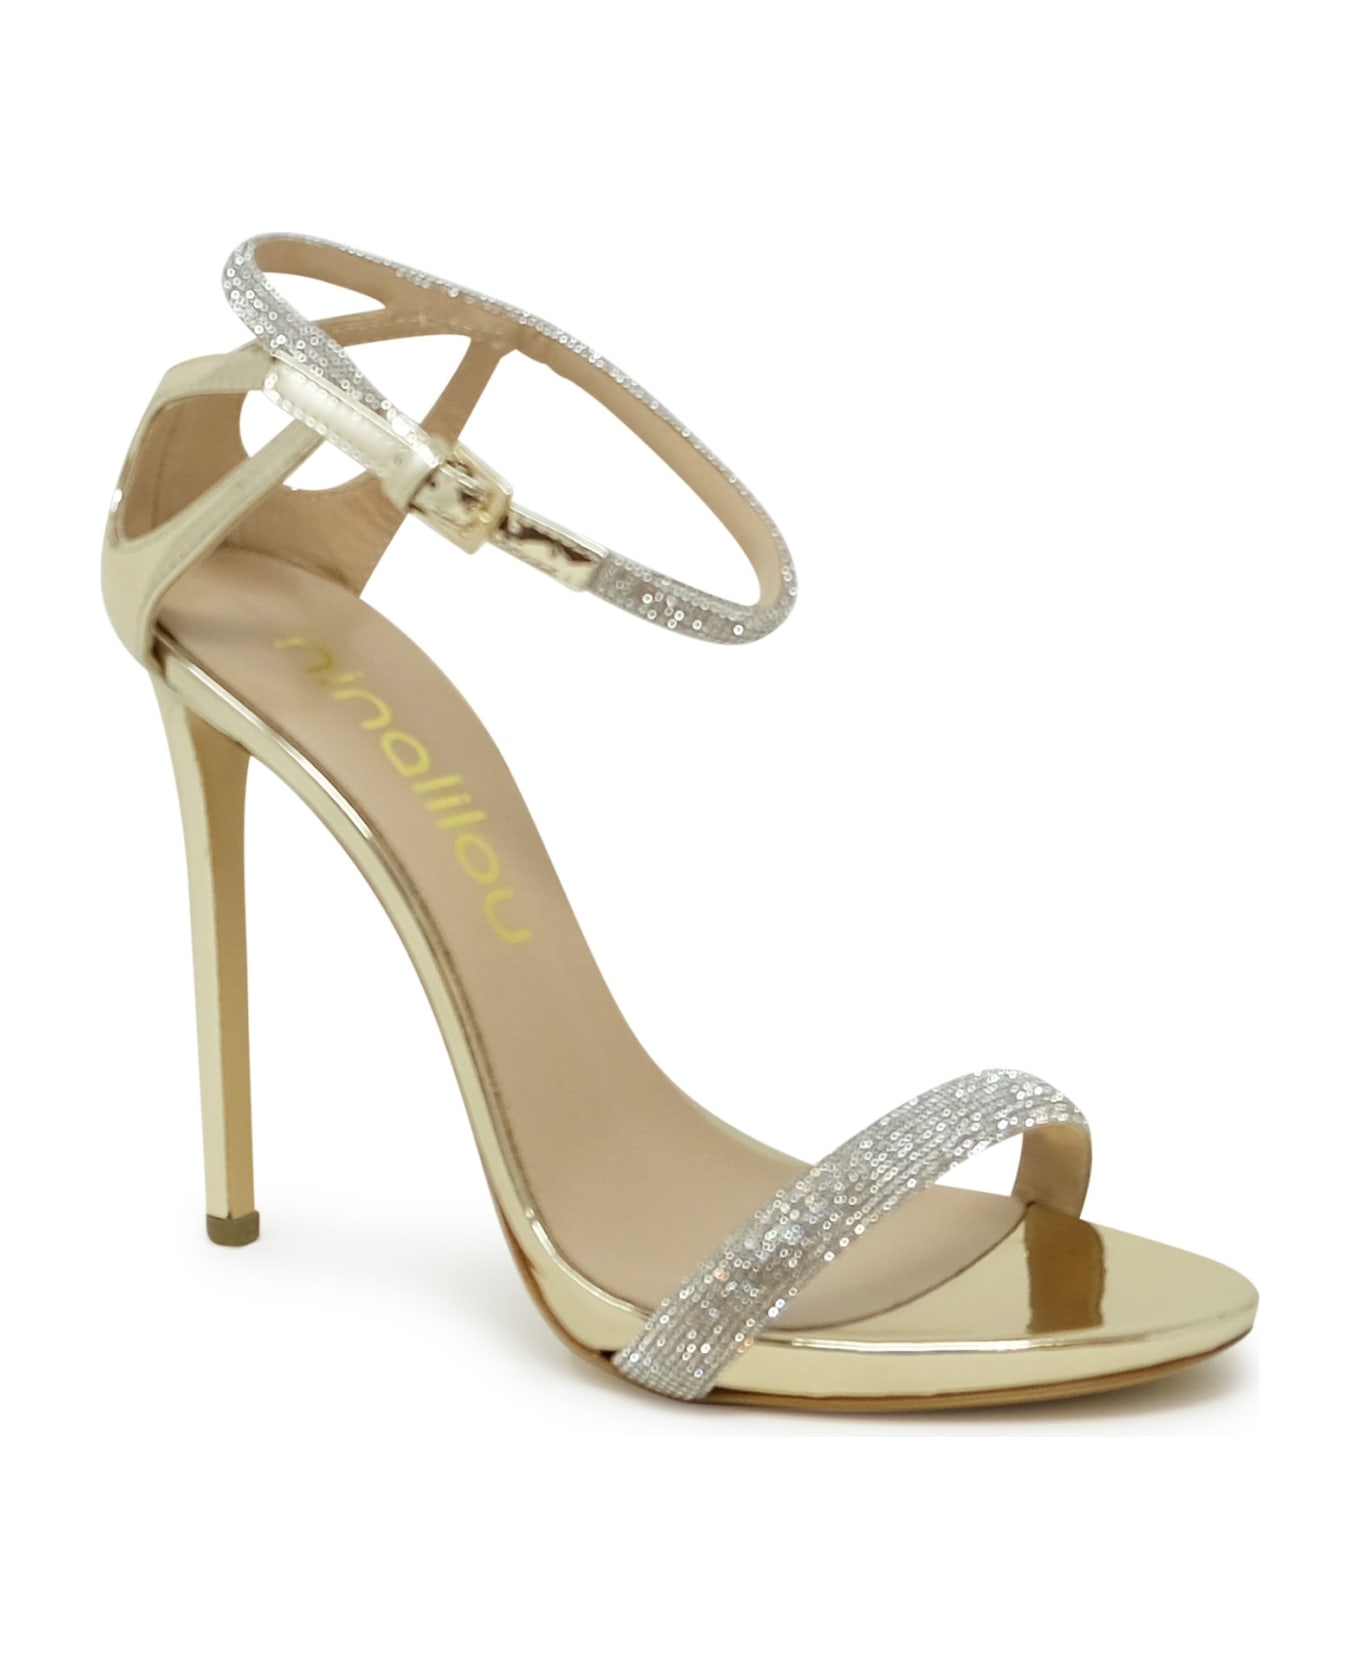 Ninalilou Gold Leather Sandals With Swarovski - GOLD